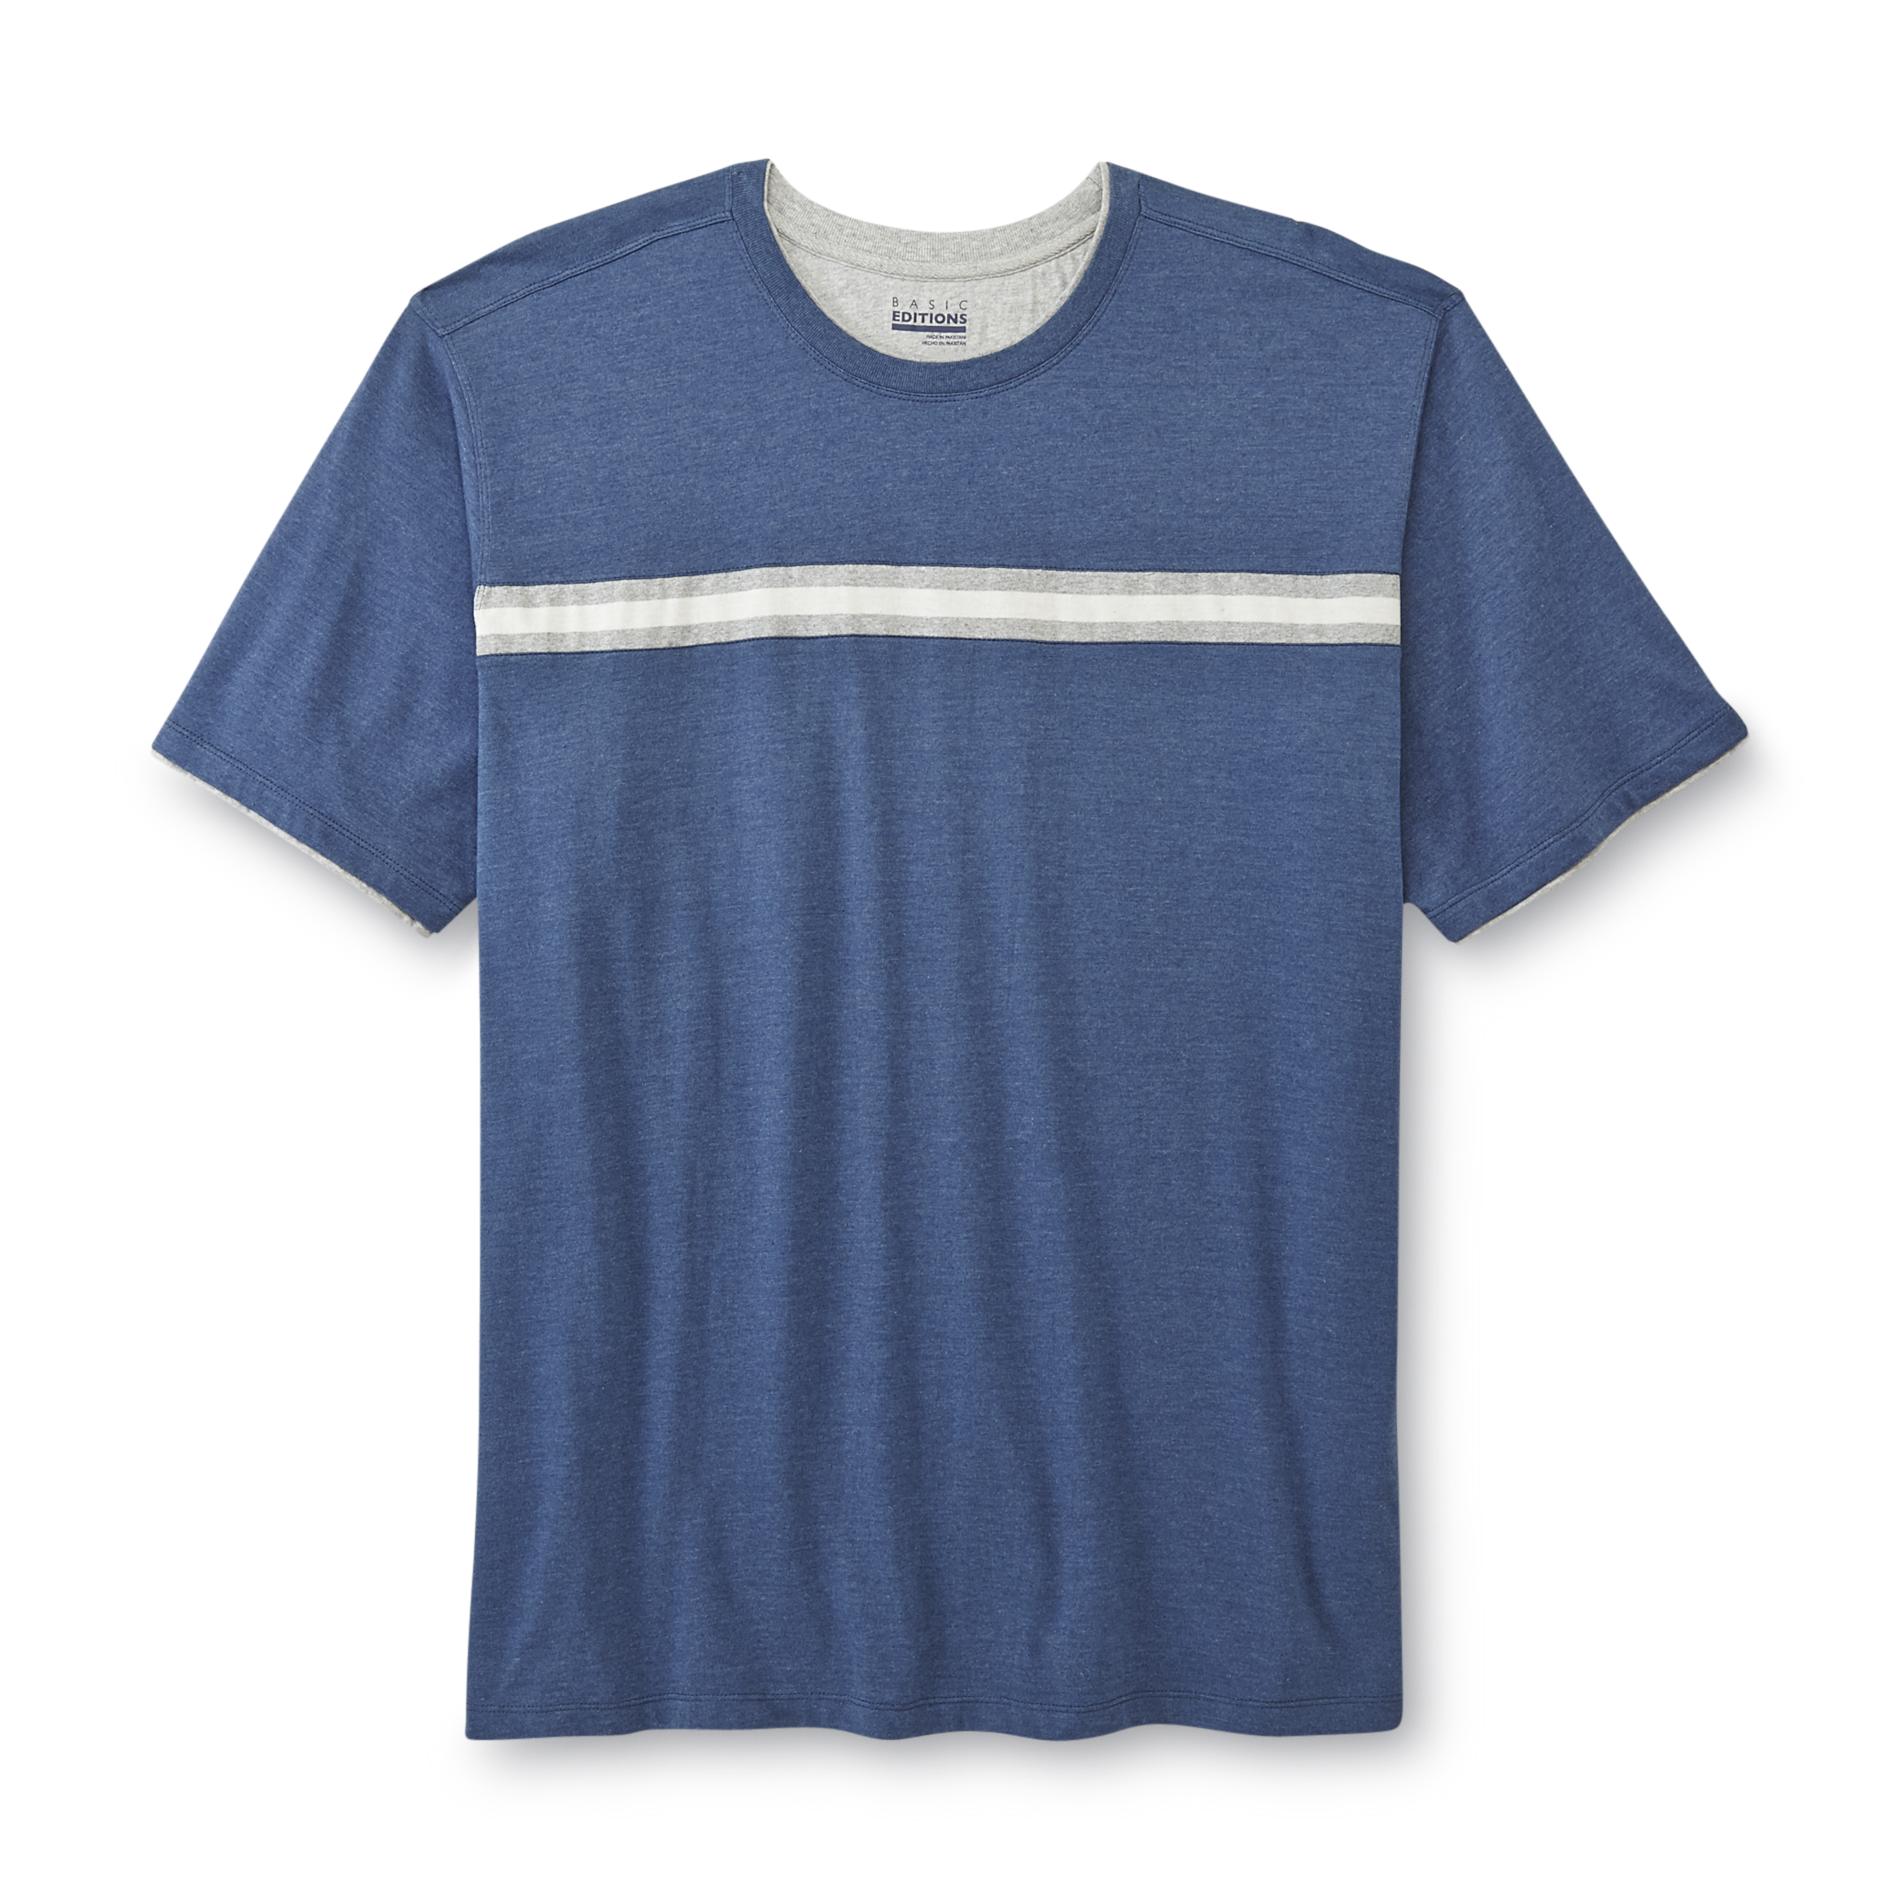 Basic Editions Men's Big & Tall Layered-Look T-Shirt - Striped